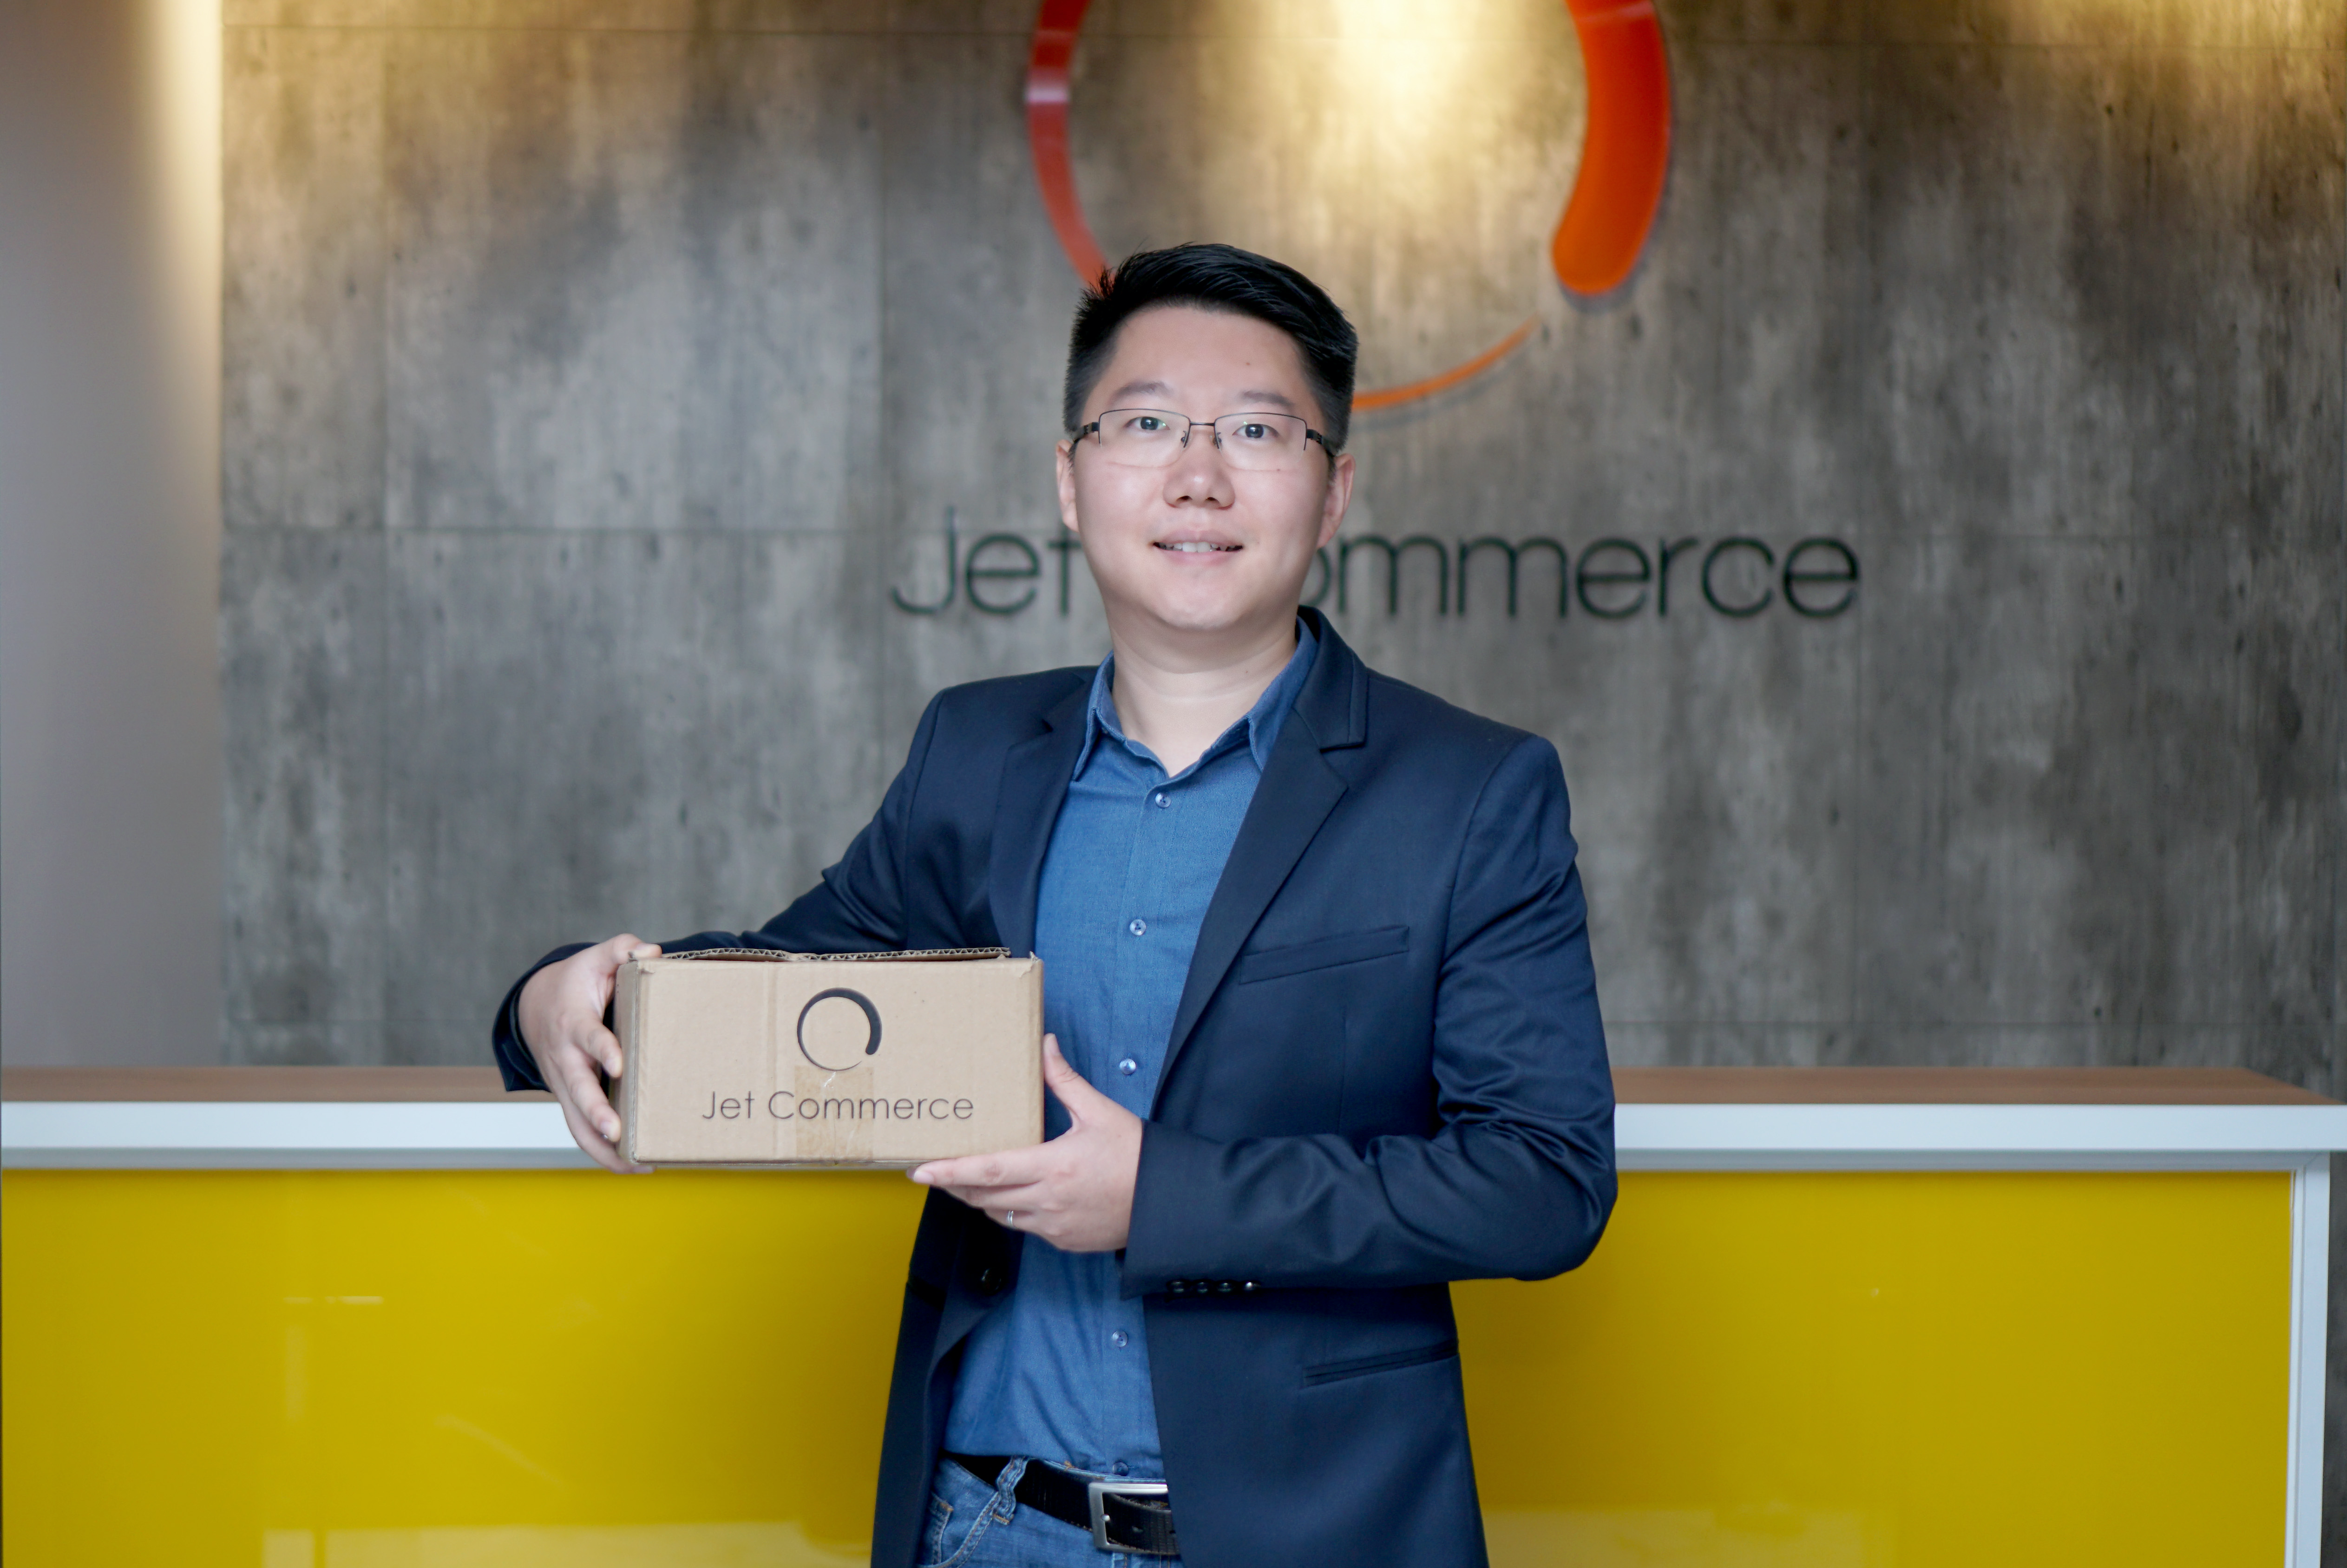 After strong international performance in 2020, Jet Commerce touches down in Malaysia